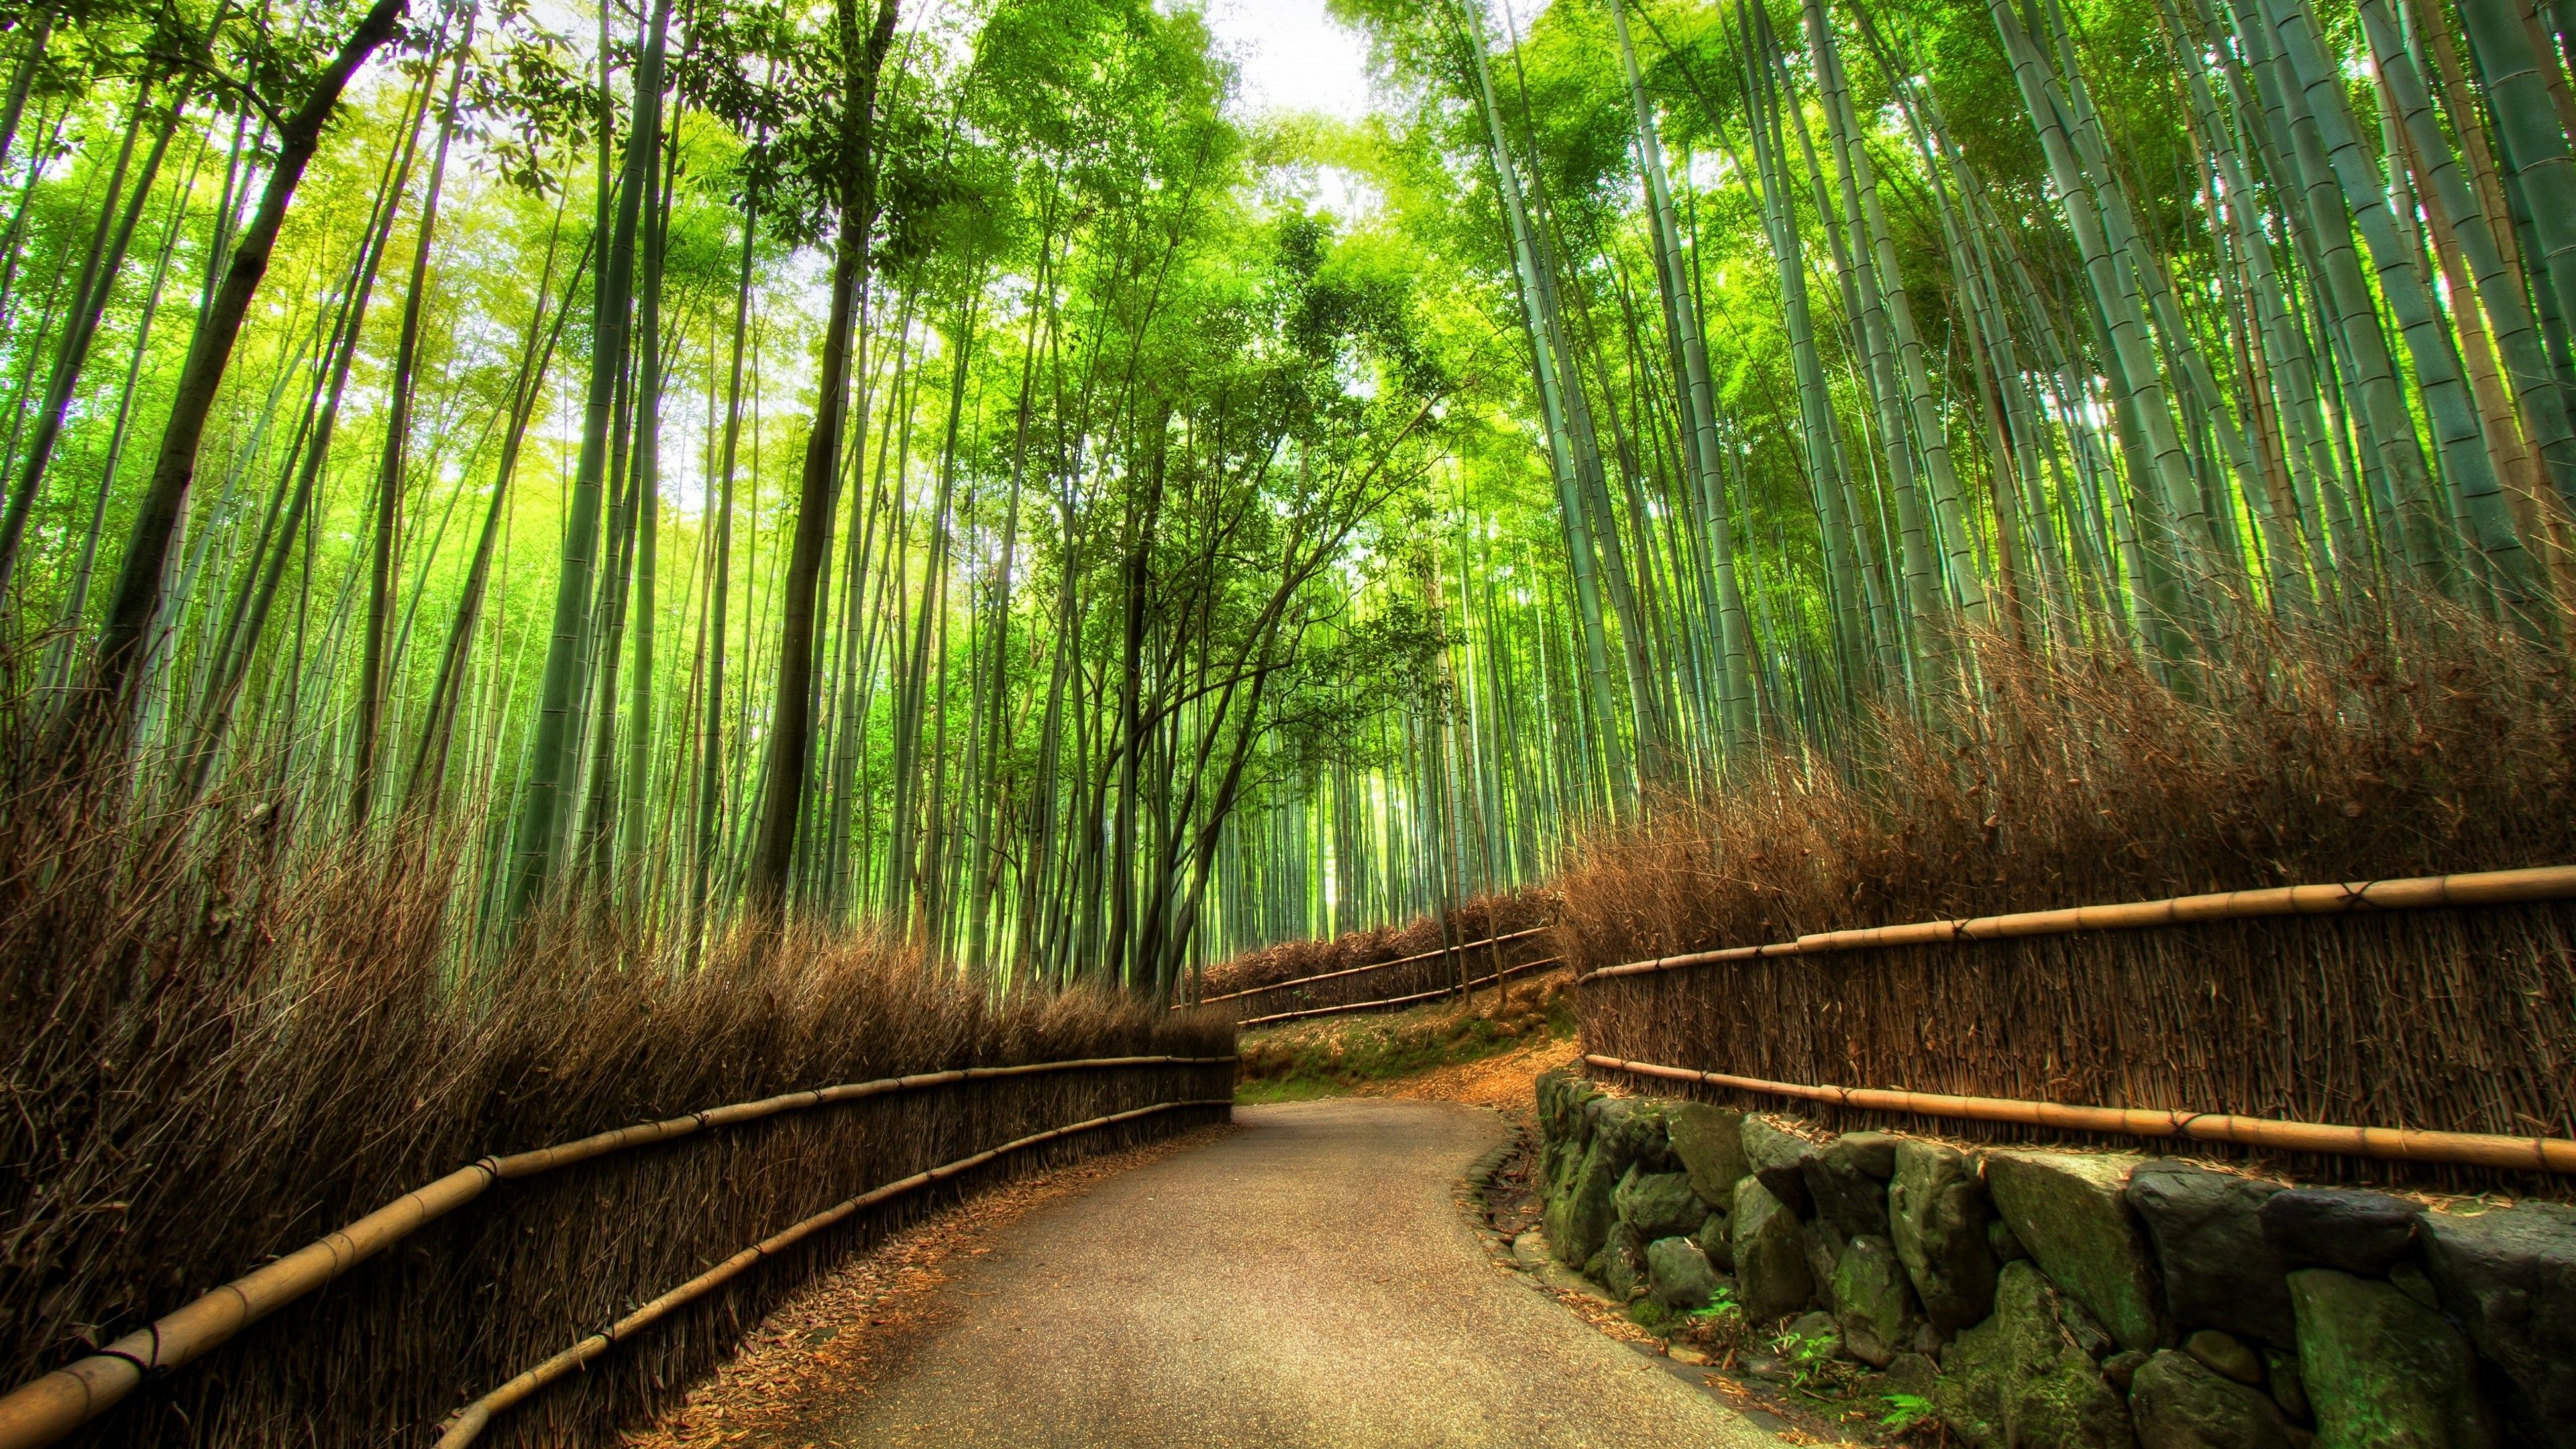 Bamboo: Kyoto forest, Japan, A giant woody grass which is grown chiefly in the tropics. 3840x2160 4K Wallpaper.